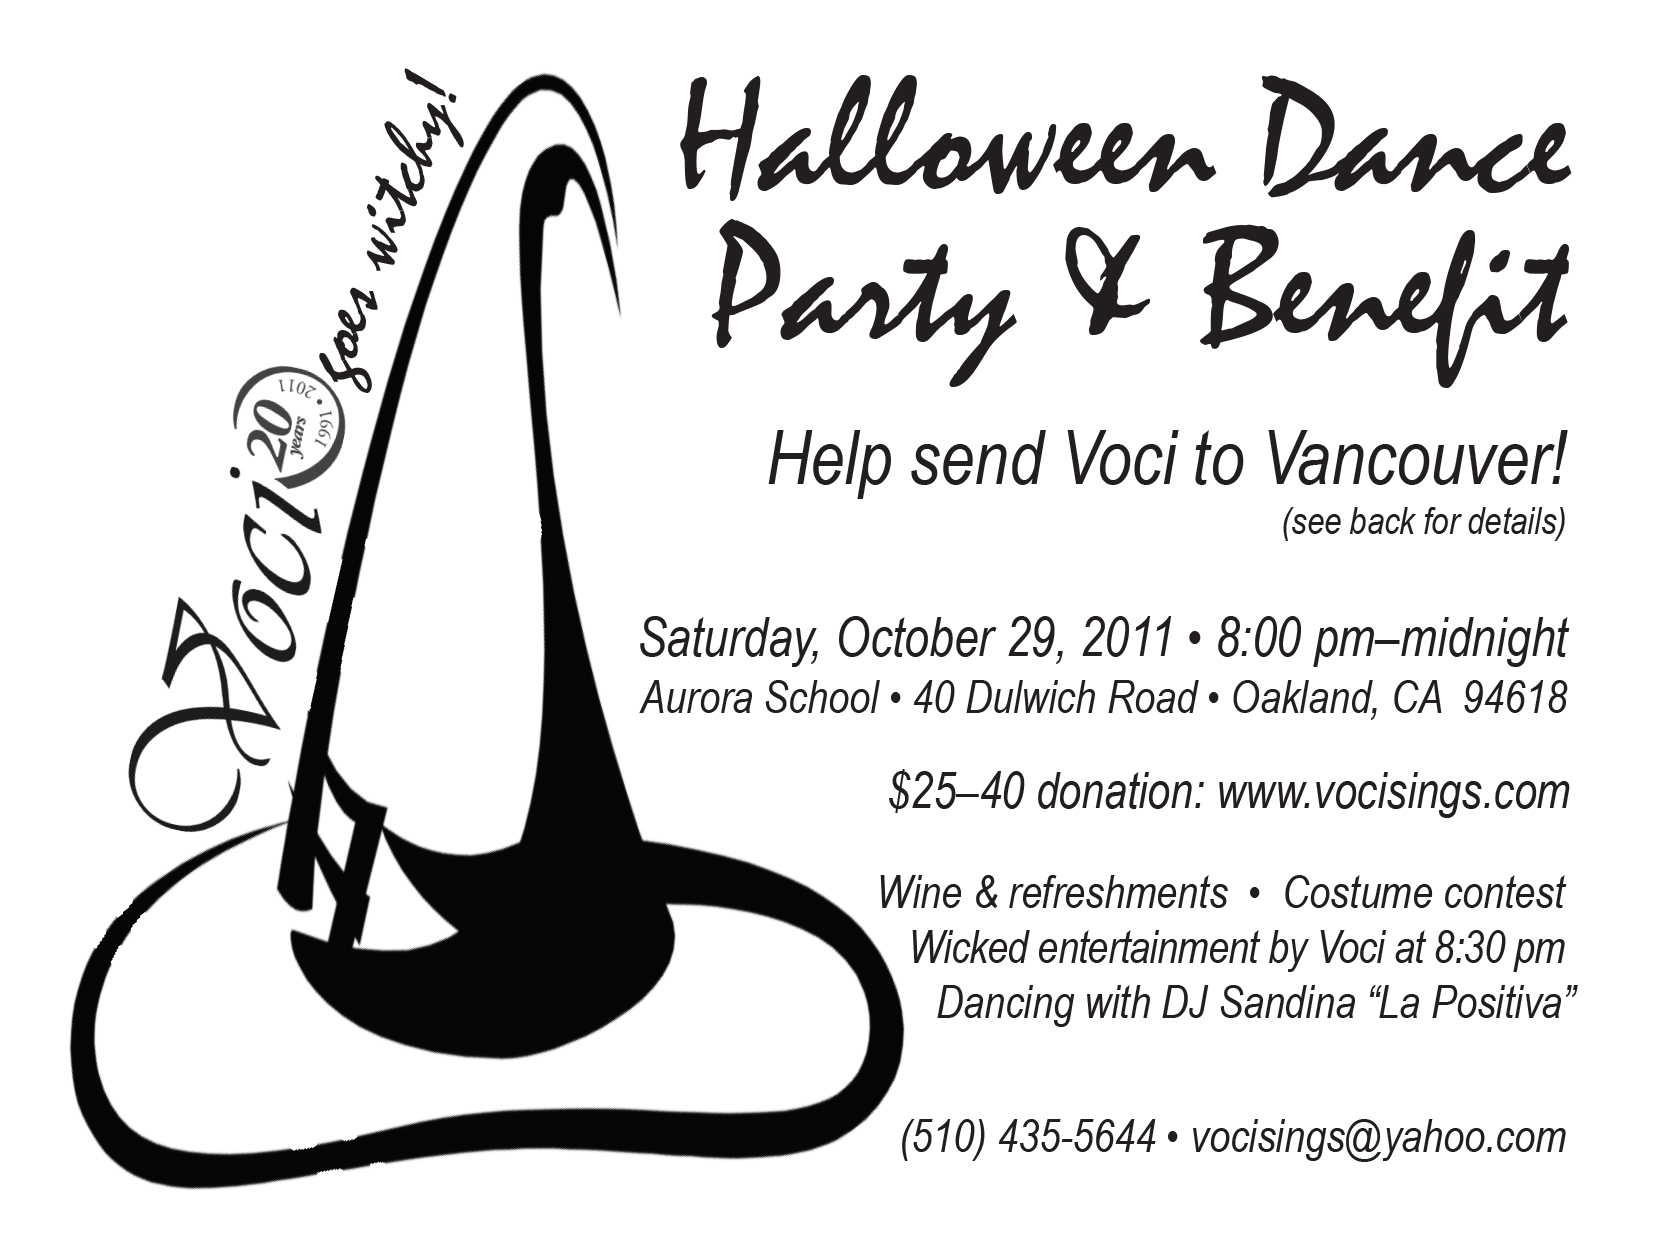 Poster for Halloween Dance Party & Benefit